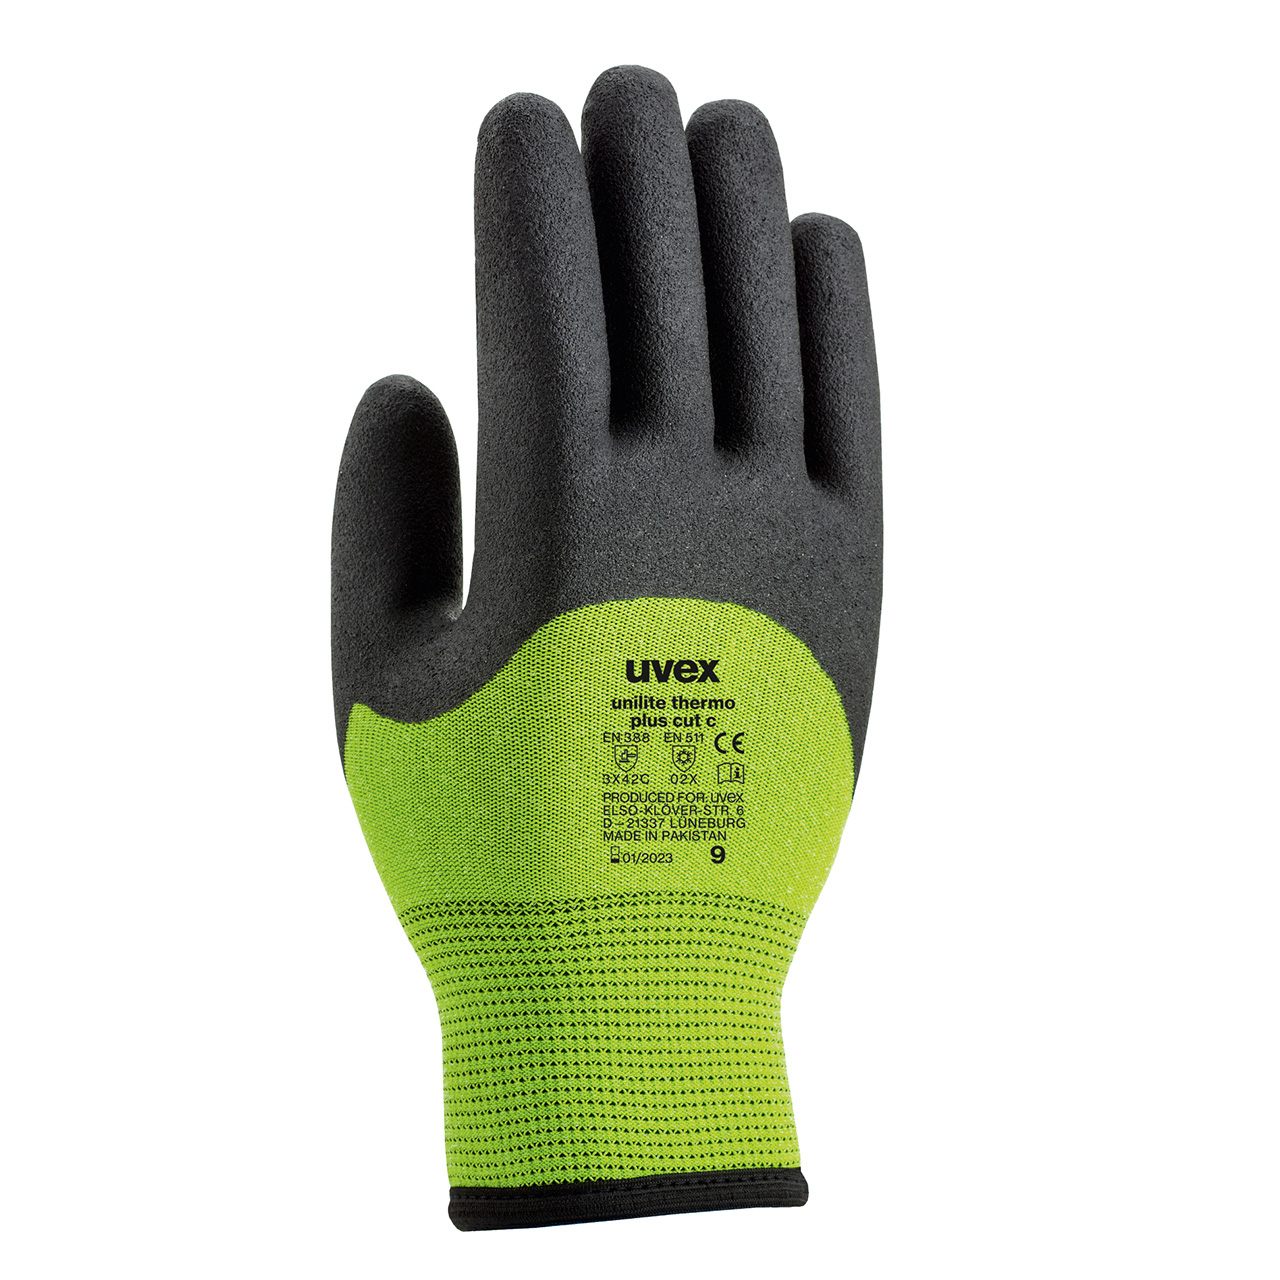 Gants anti-froid UVEX Unilite Thermo Cut C - AFS - Application